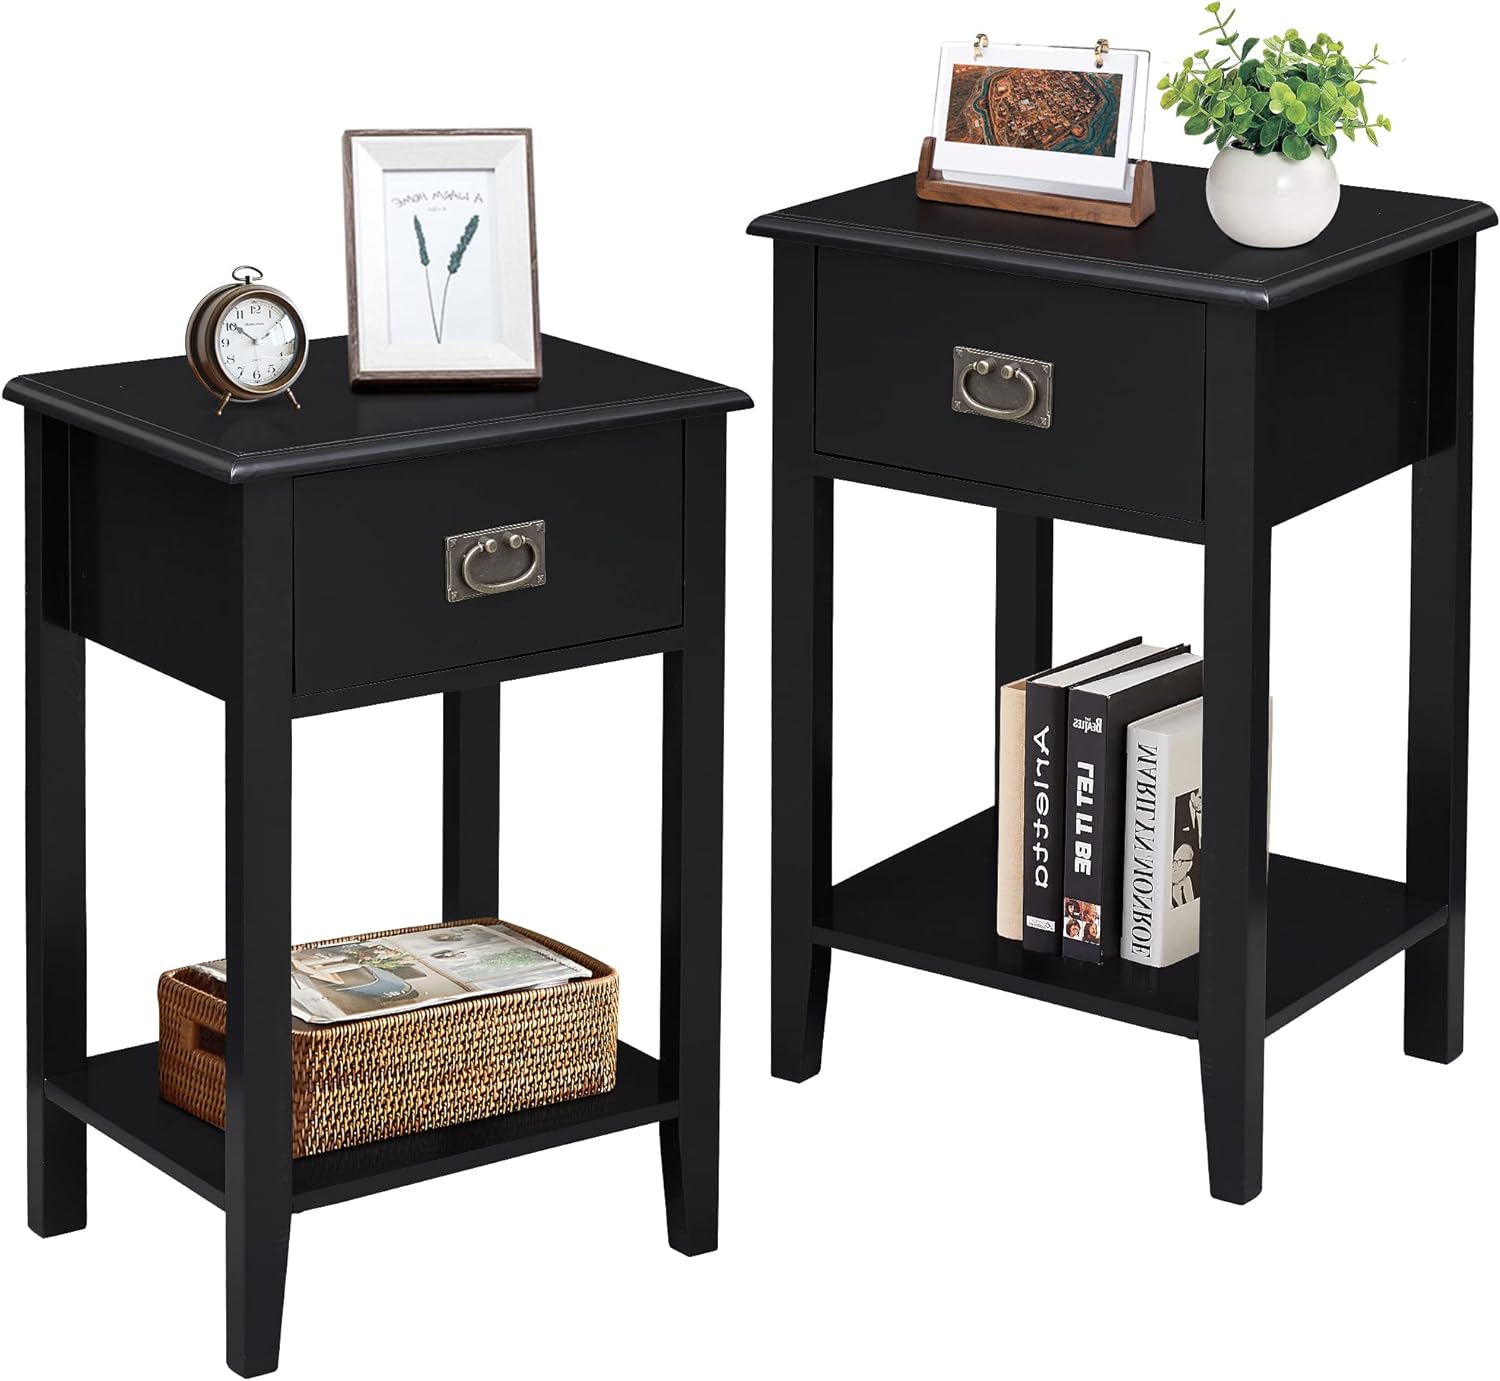 VECELO Modern Nightstands Set of 2, Side End Table with Drawers